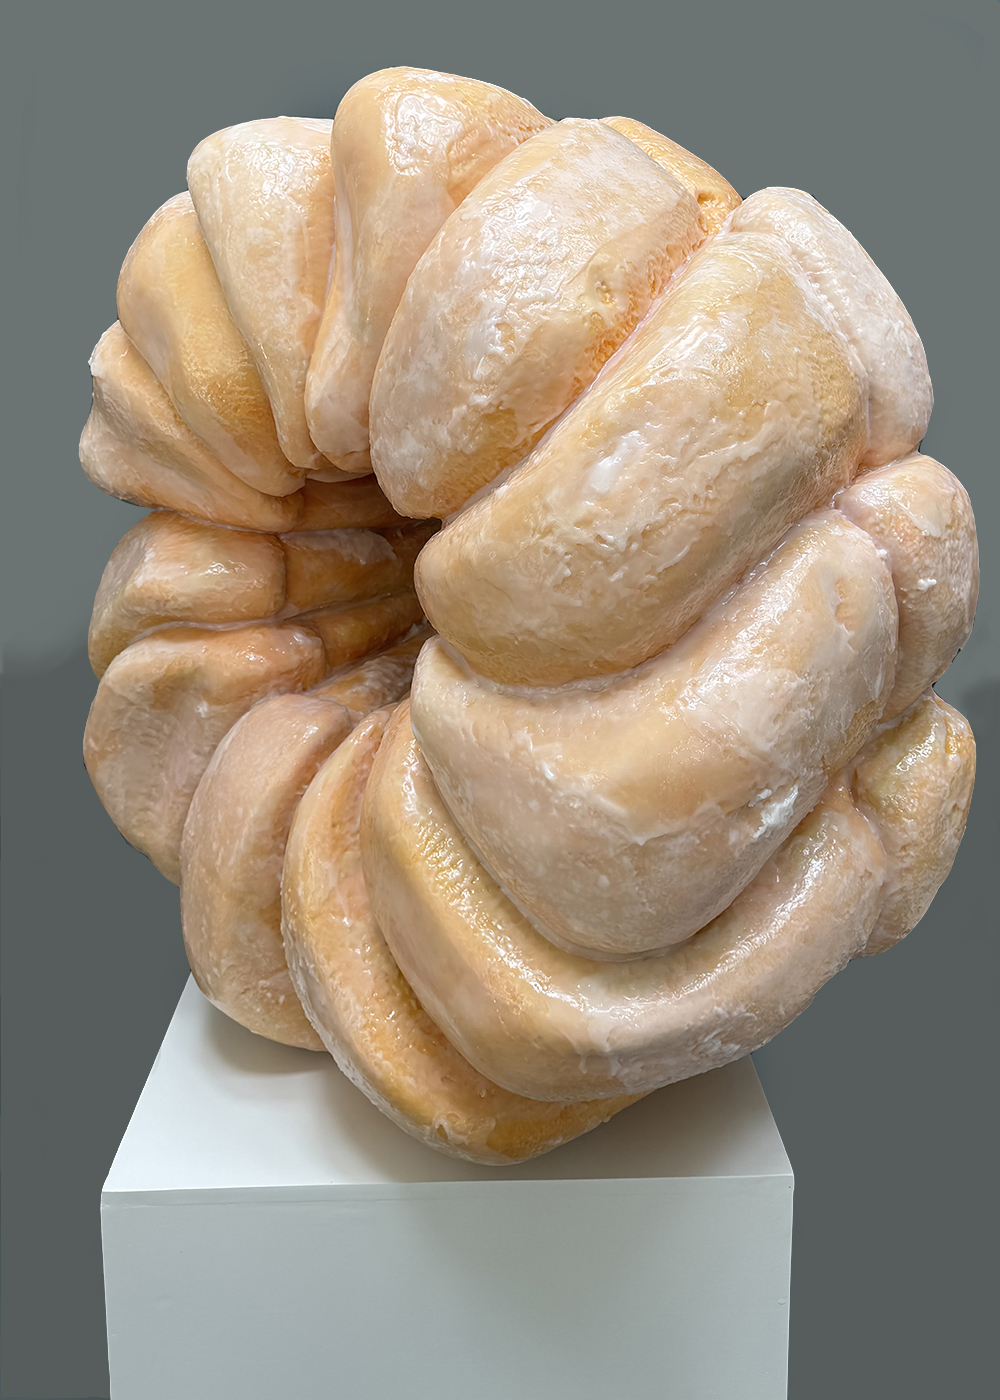 French Cruller Donut